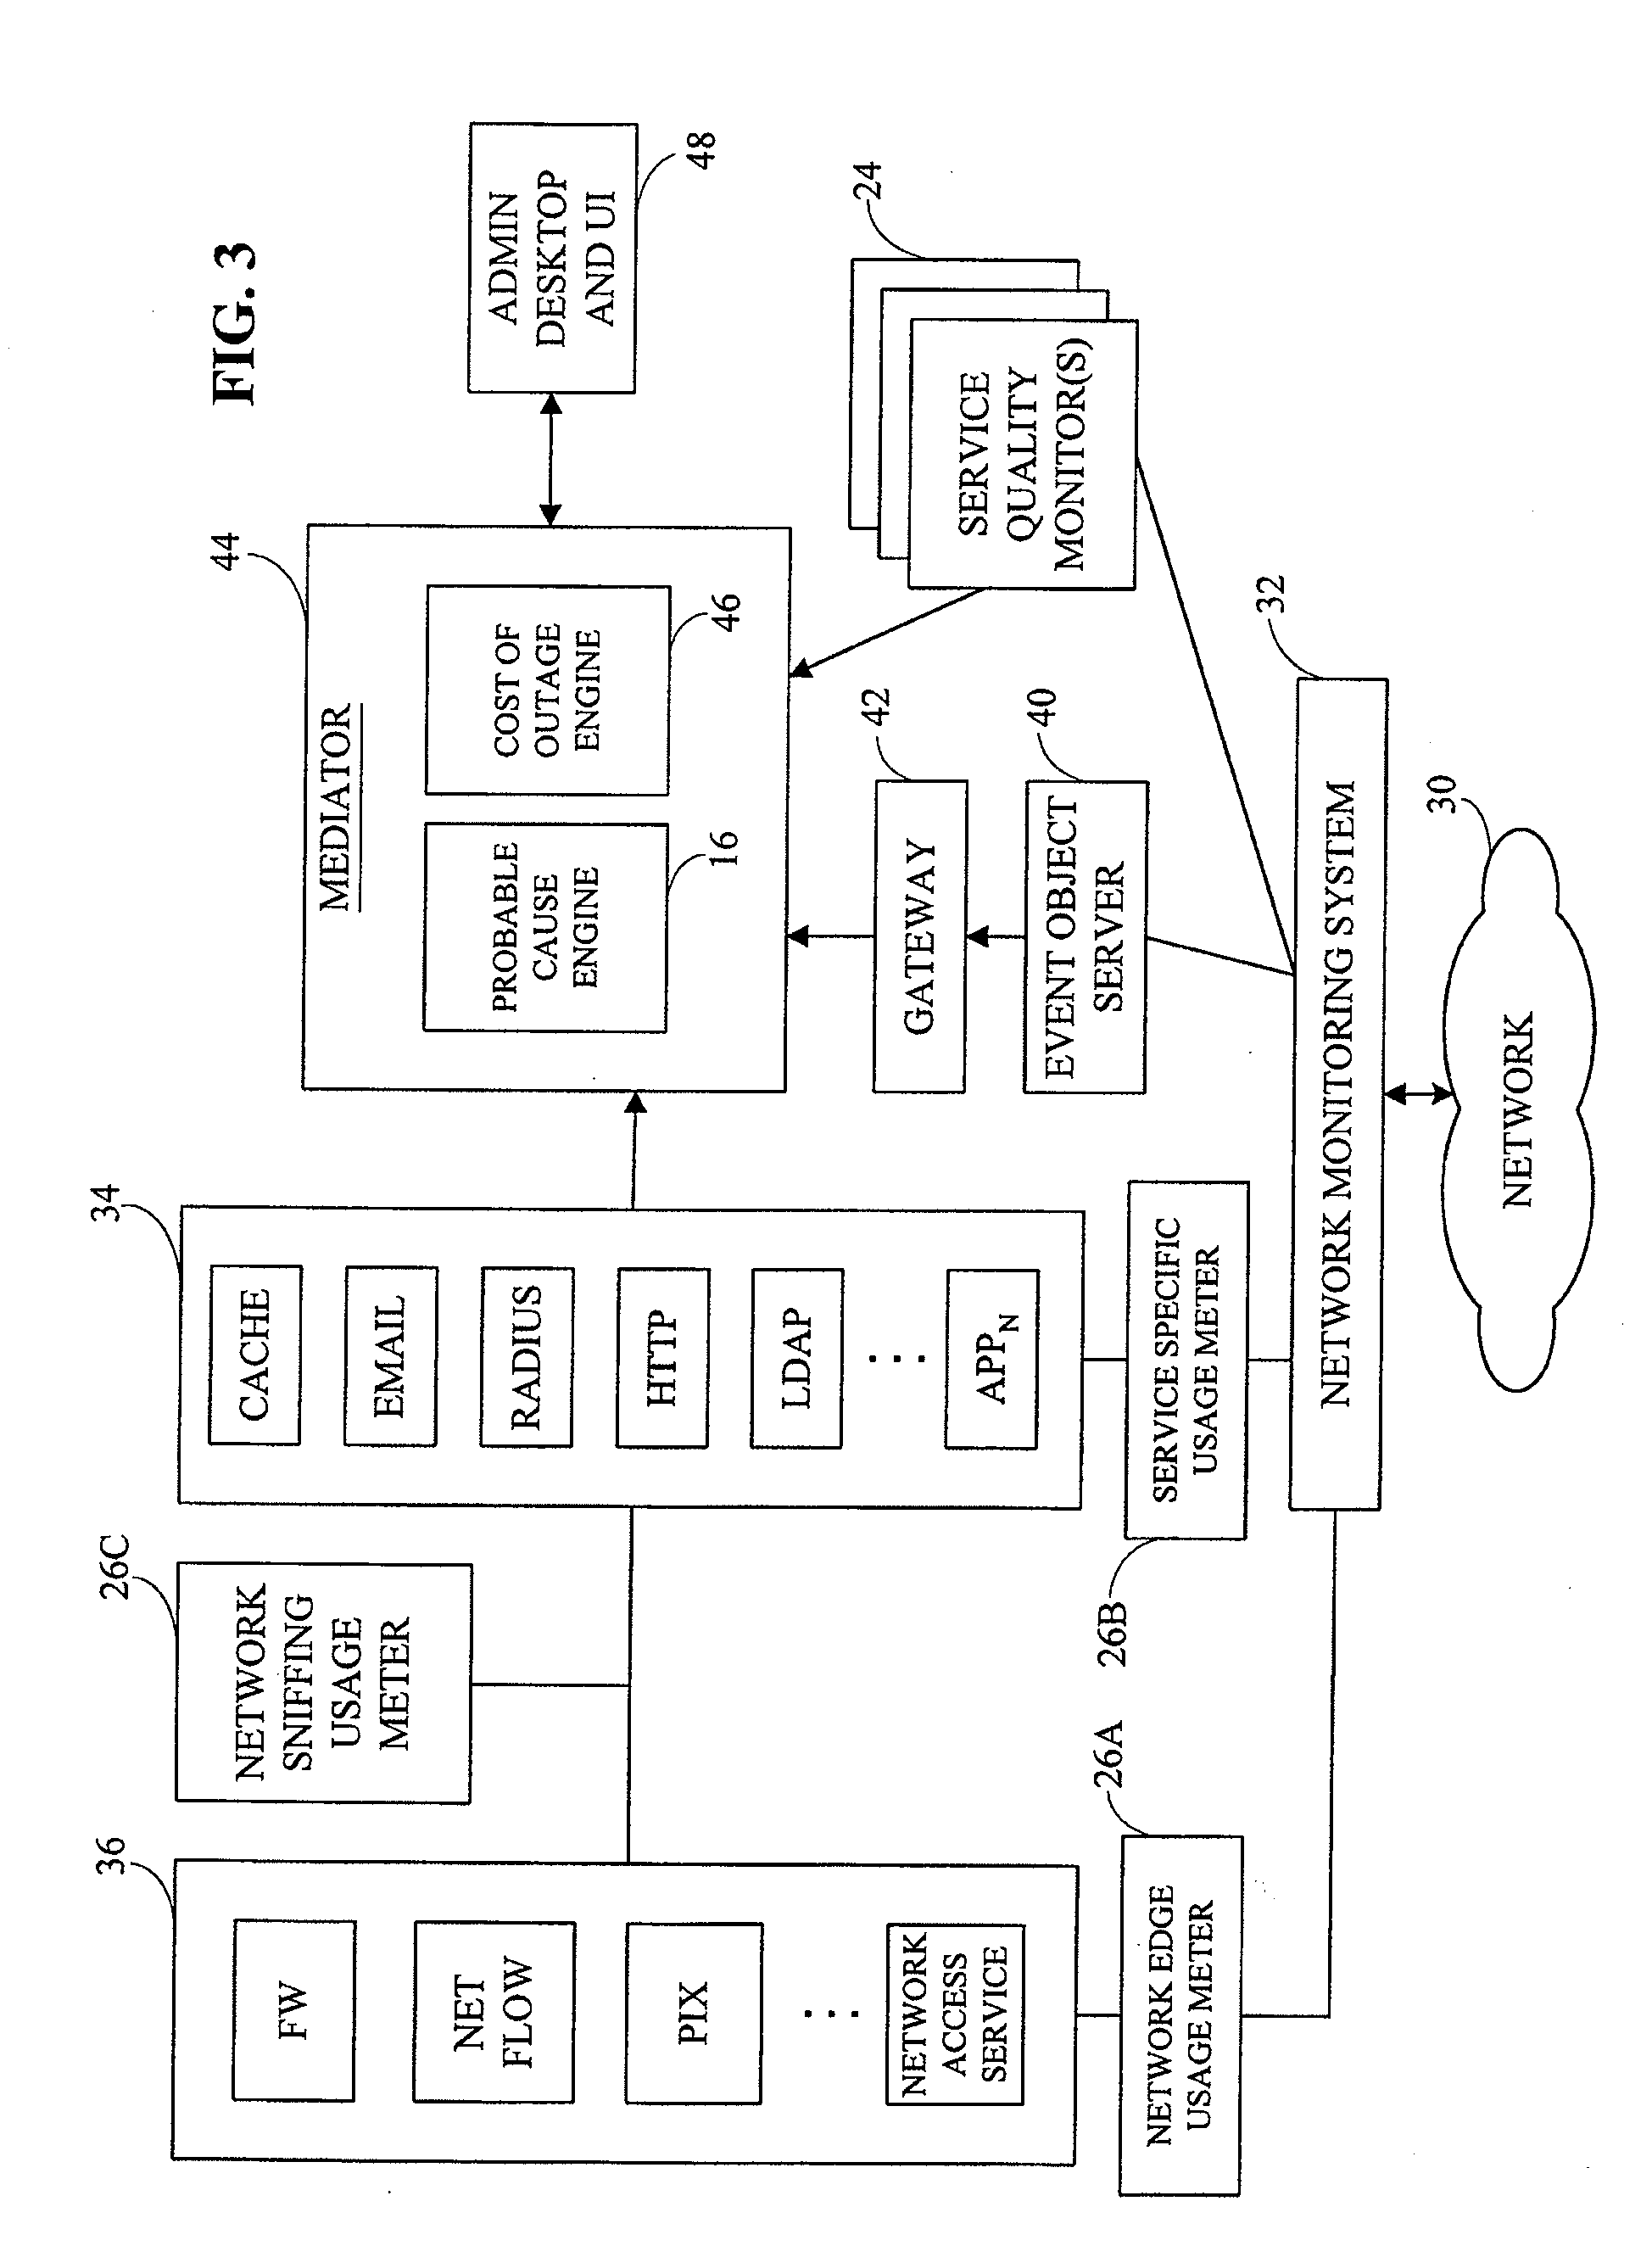 Method and System for Predicting Causes of Network Service Outages Using Time Domain Correlation